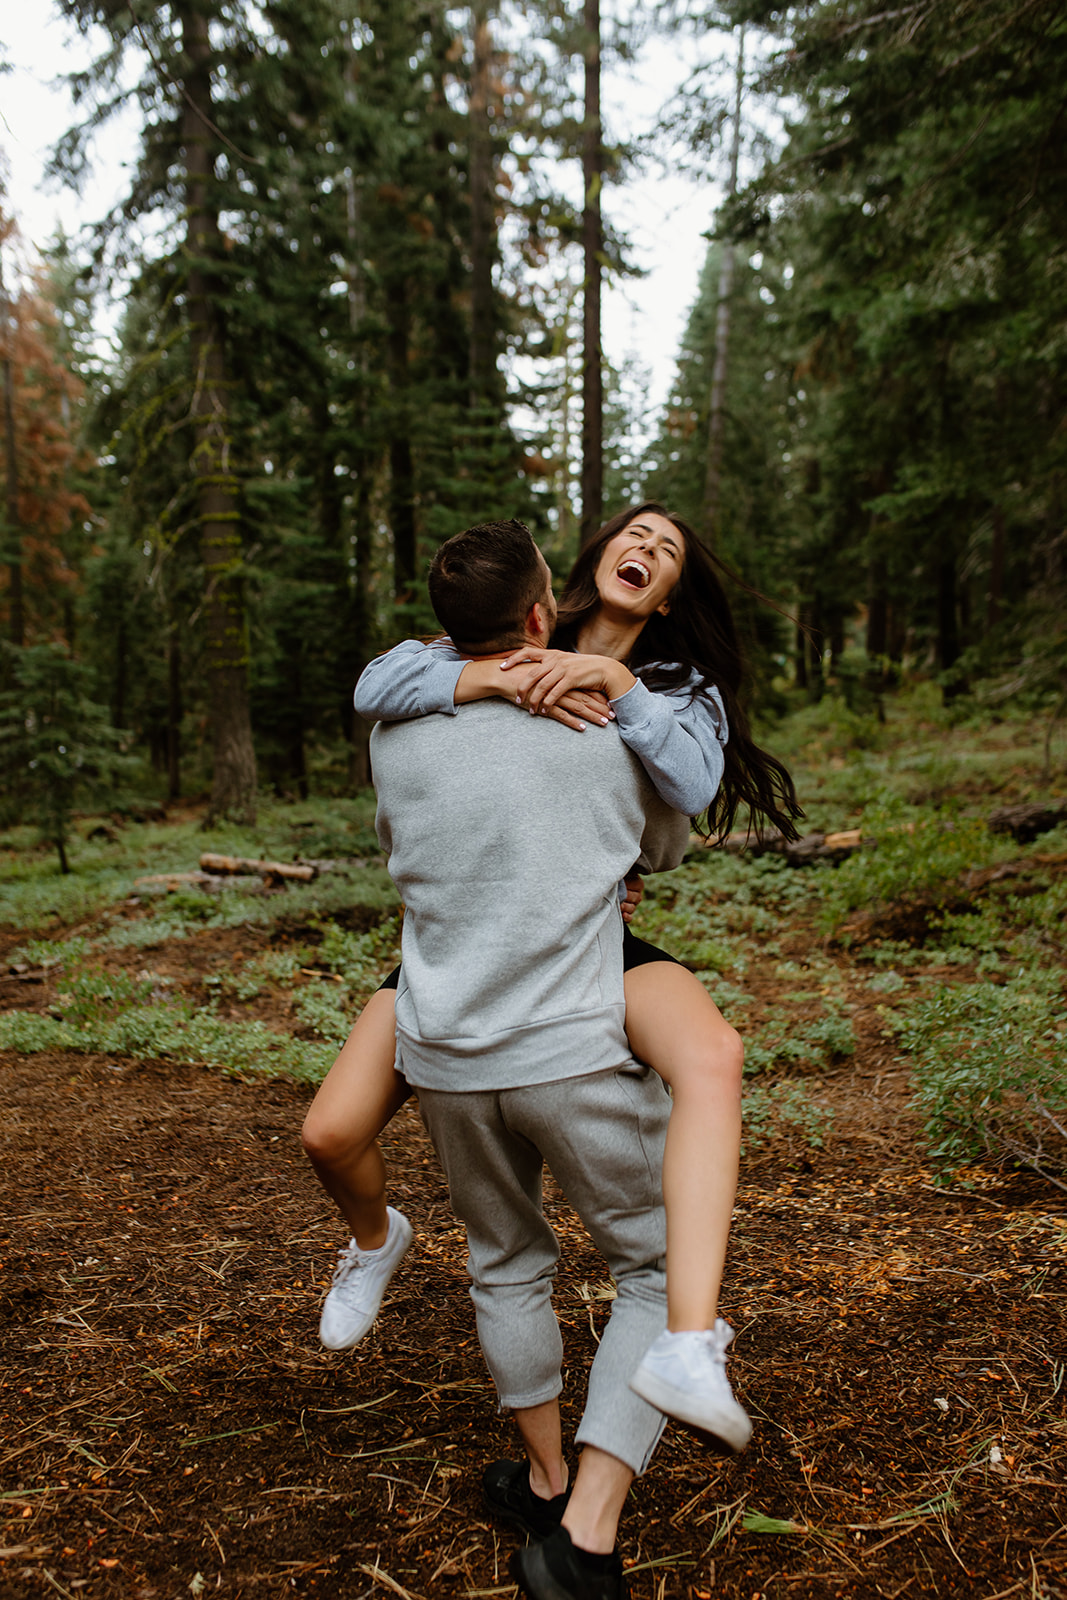 Brunette couple taking photos in the Lake Tahoe forest. They're both wearing grey cozy sweats and having fun laughing together while getting pictures taken by Wild Love & Wanderlust, a lake tahoe wedding photographer.